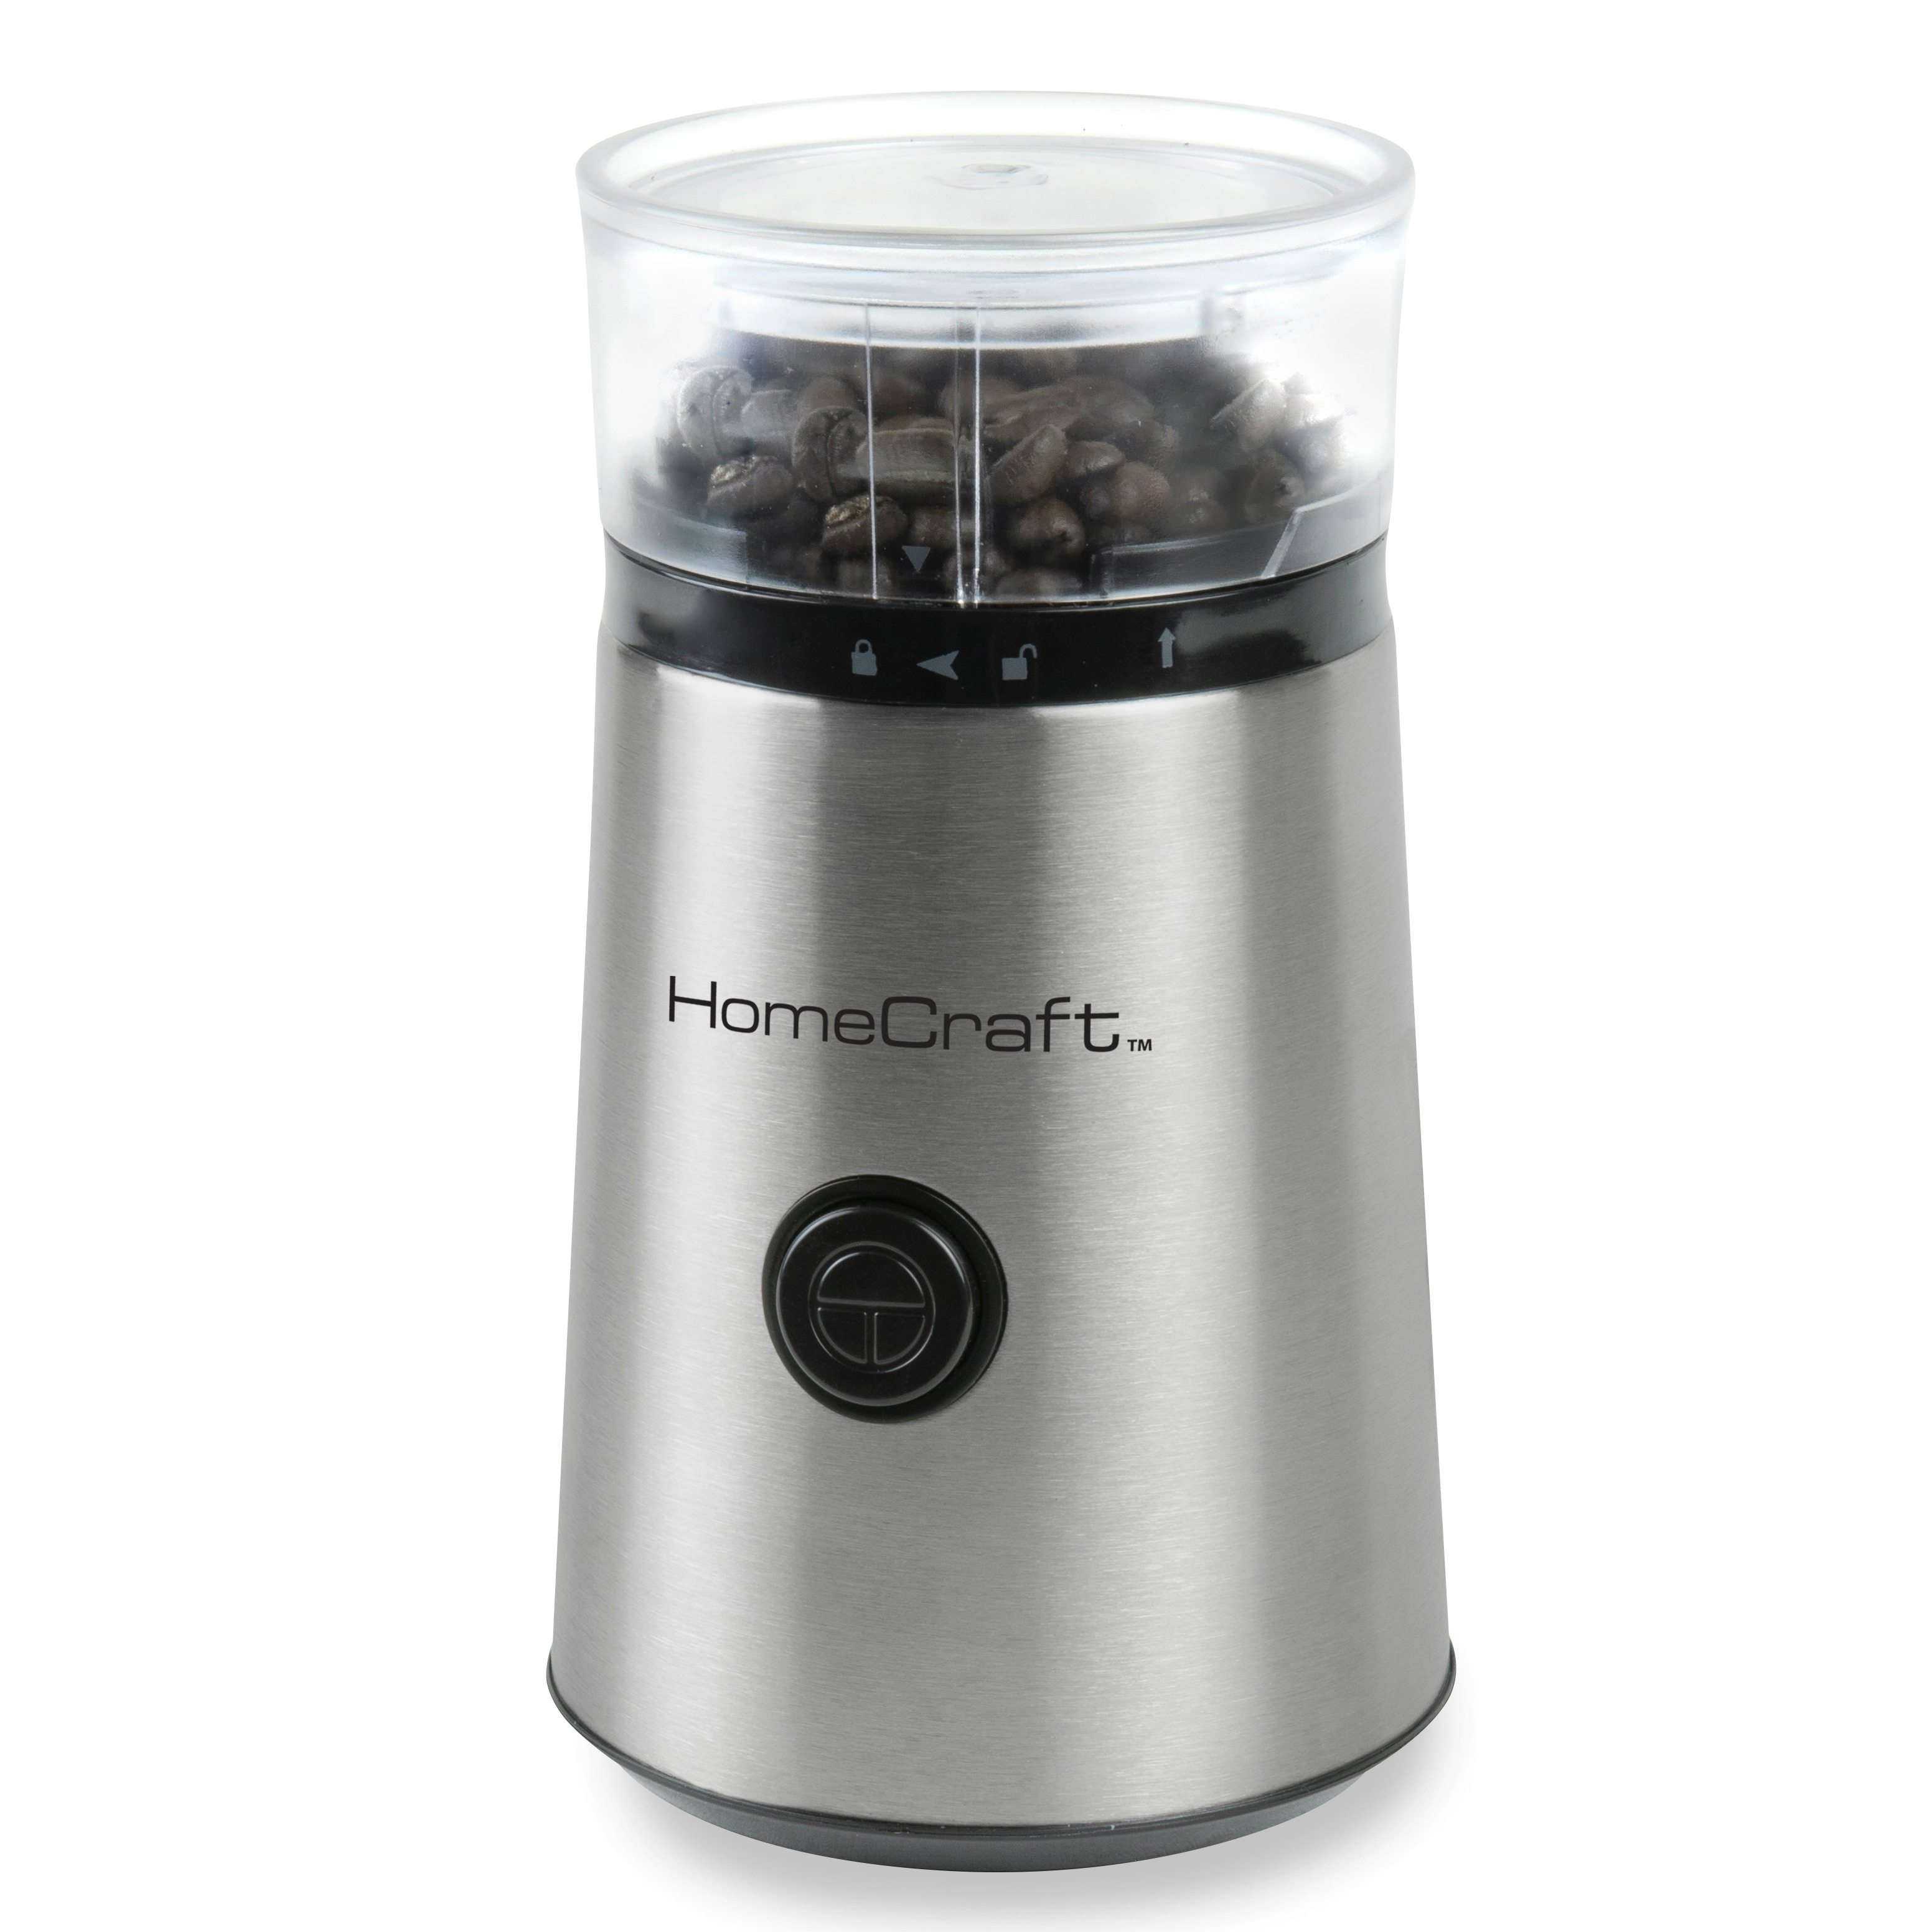 https://ak1.ostkcdn.com/images/products/is/images/direct/0f72257137f8858192f61479ed60d1fa08fbc41f/HomeCraft-HCCG1SS-Stainless-Steel-Coffee-Grinder.jpg